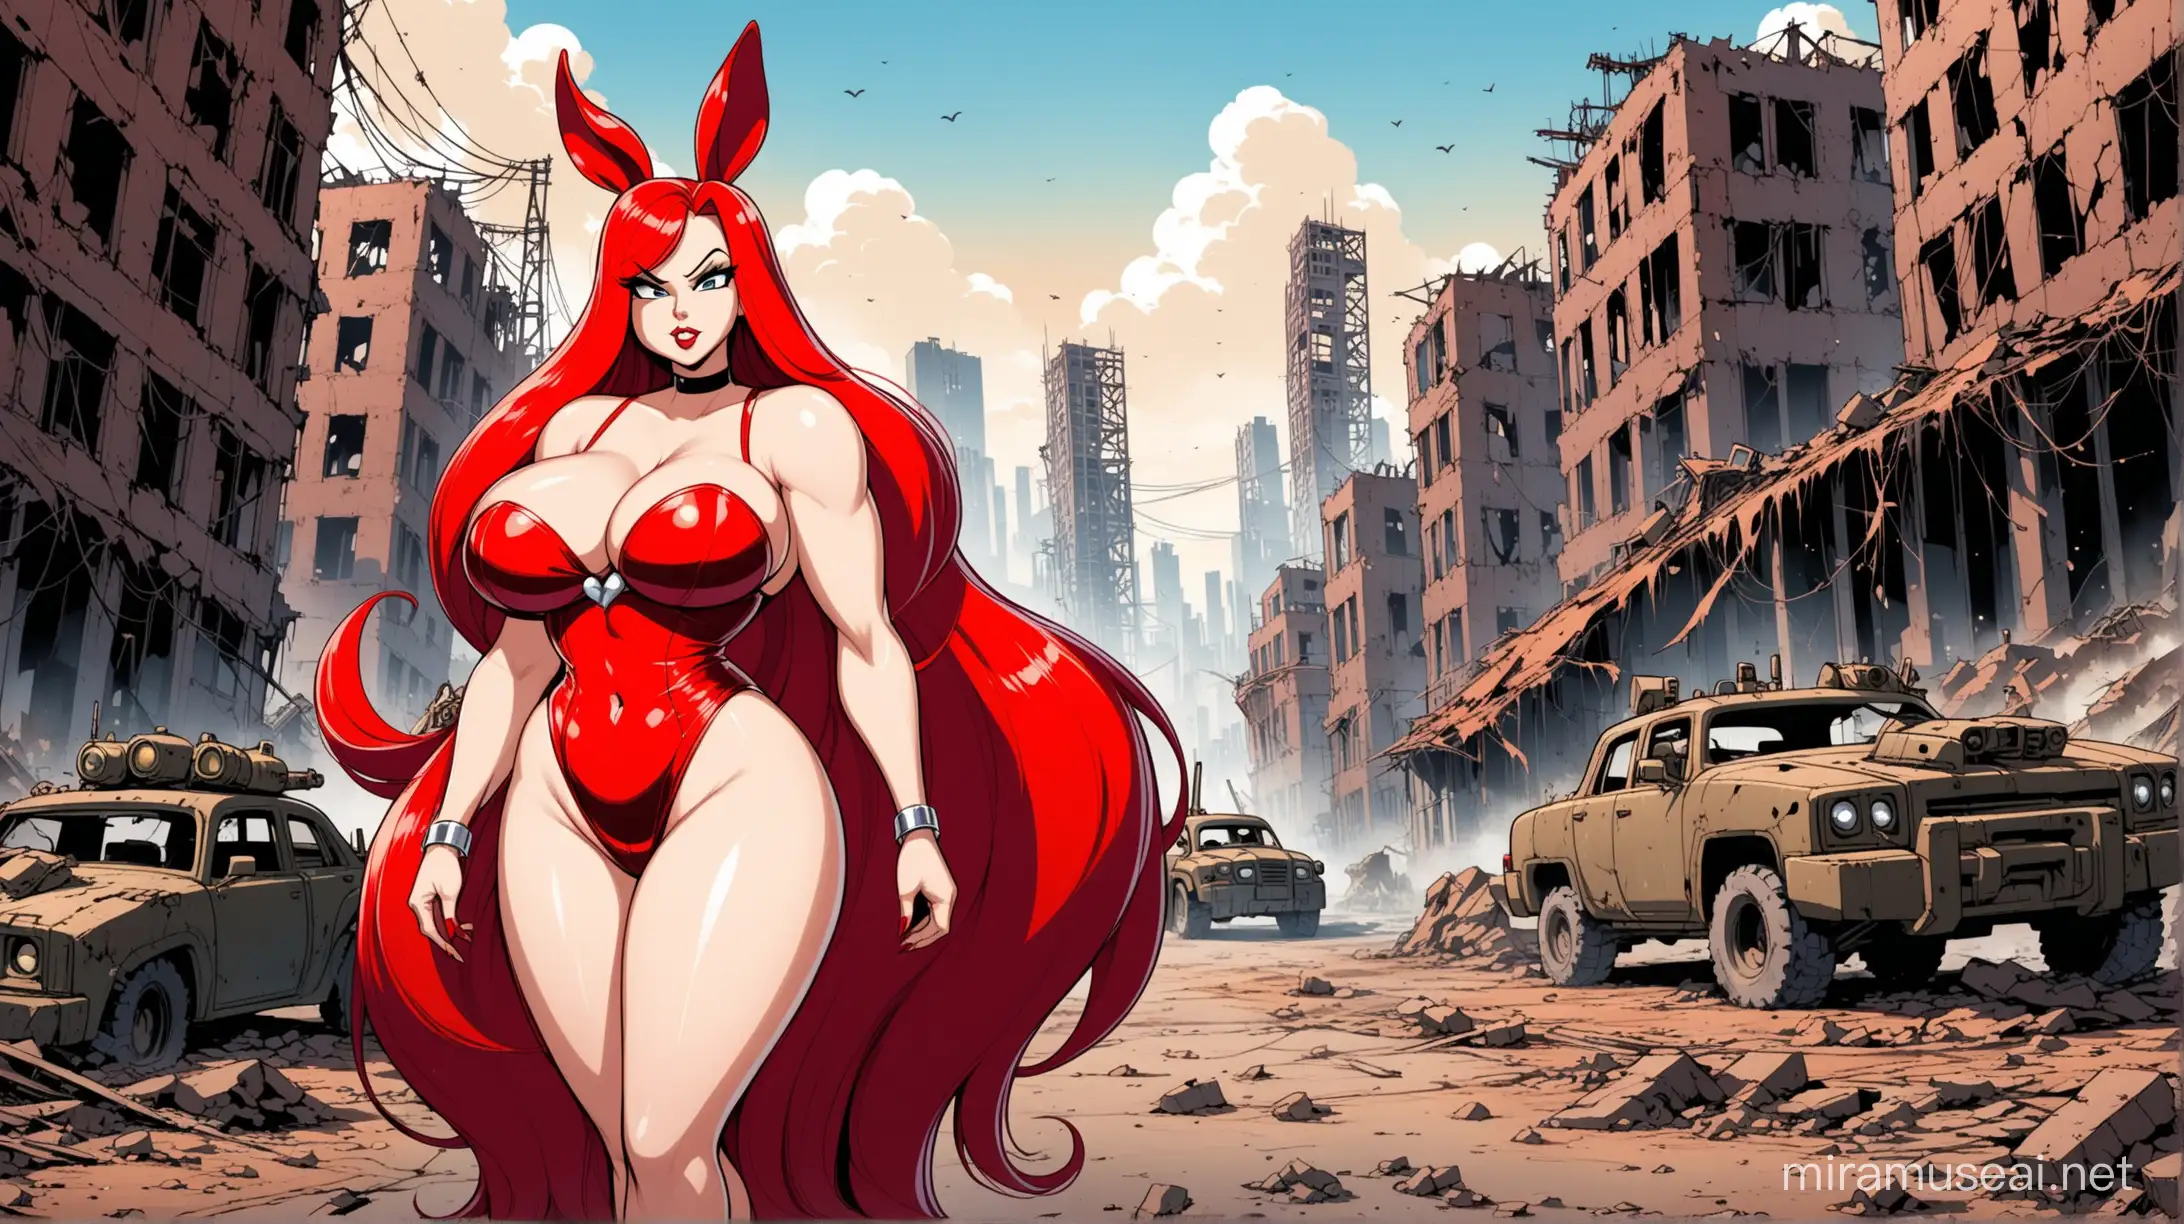 a voluptuous Jessica rabbit with lots of cleavage in cartoon style in battle armor with a bombed out postapocalyptic city in the backgroundty